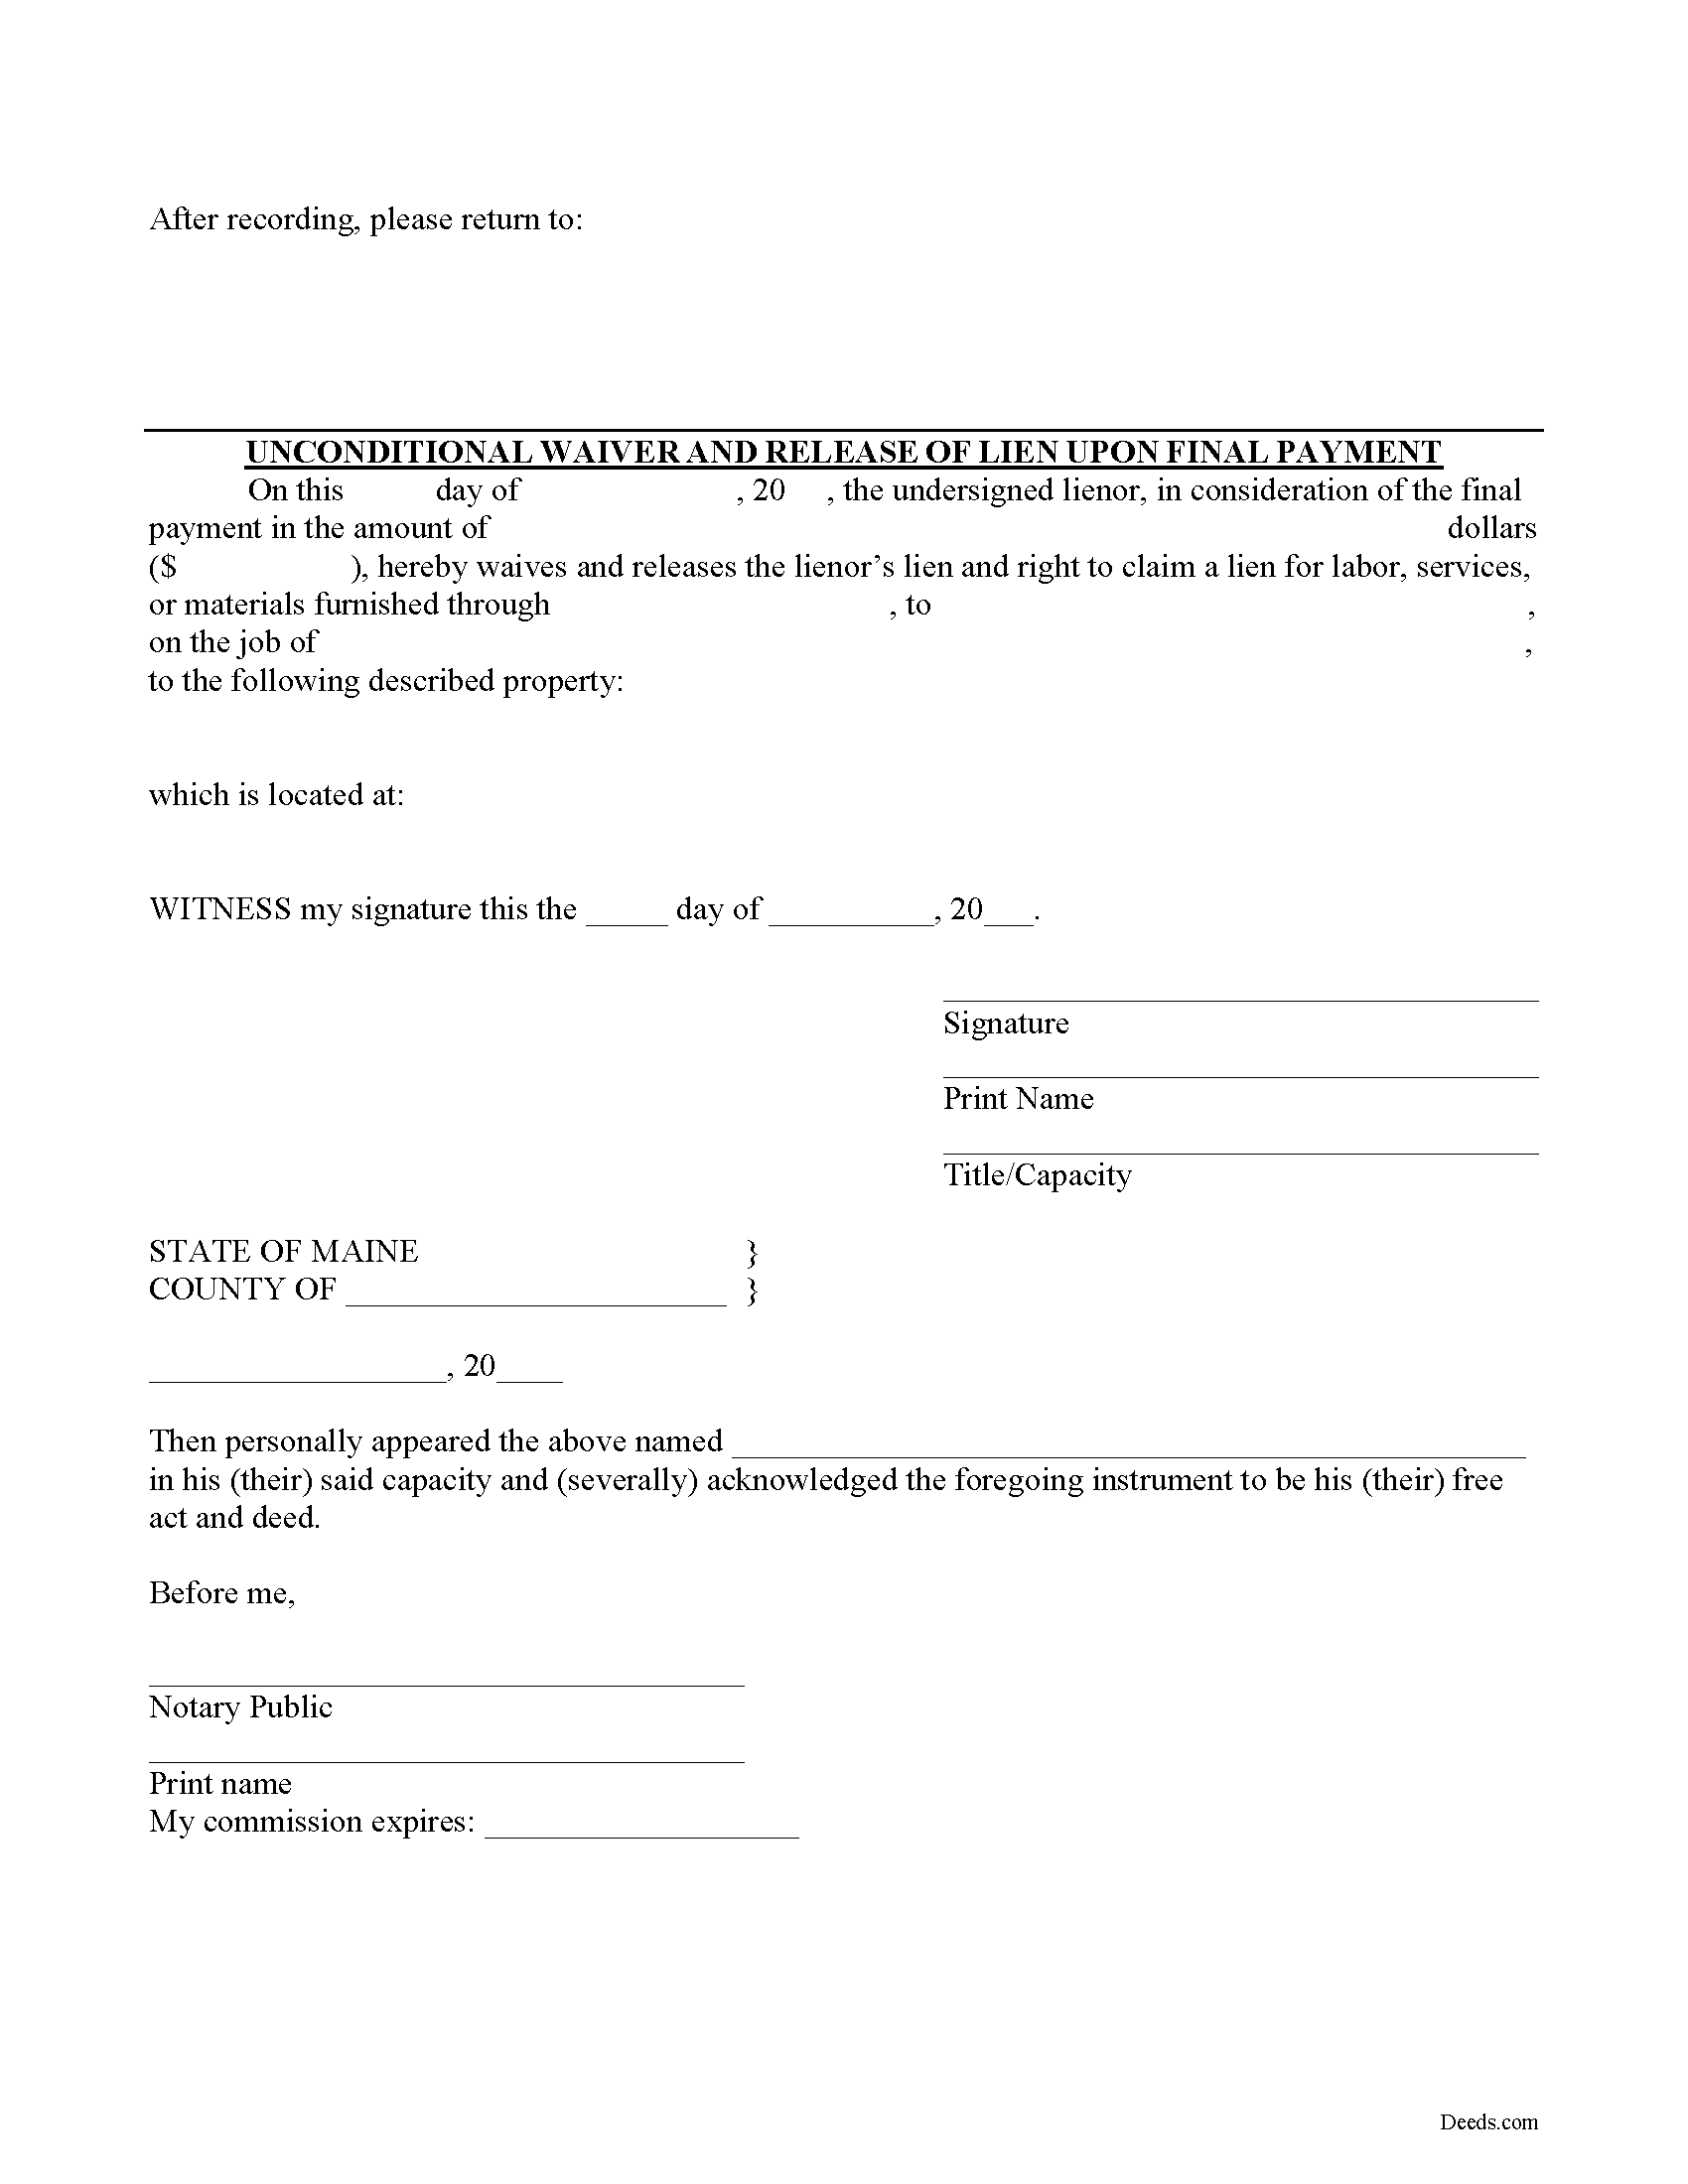 Unconditional Lien Waiver on Final Payment Form